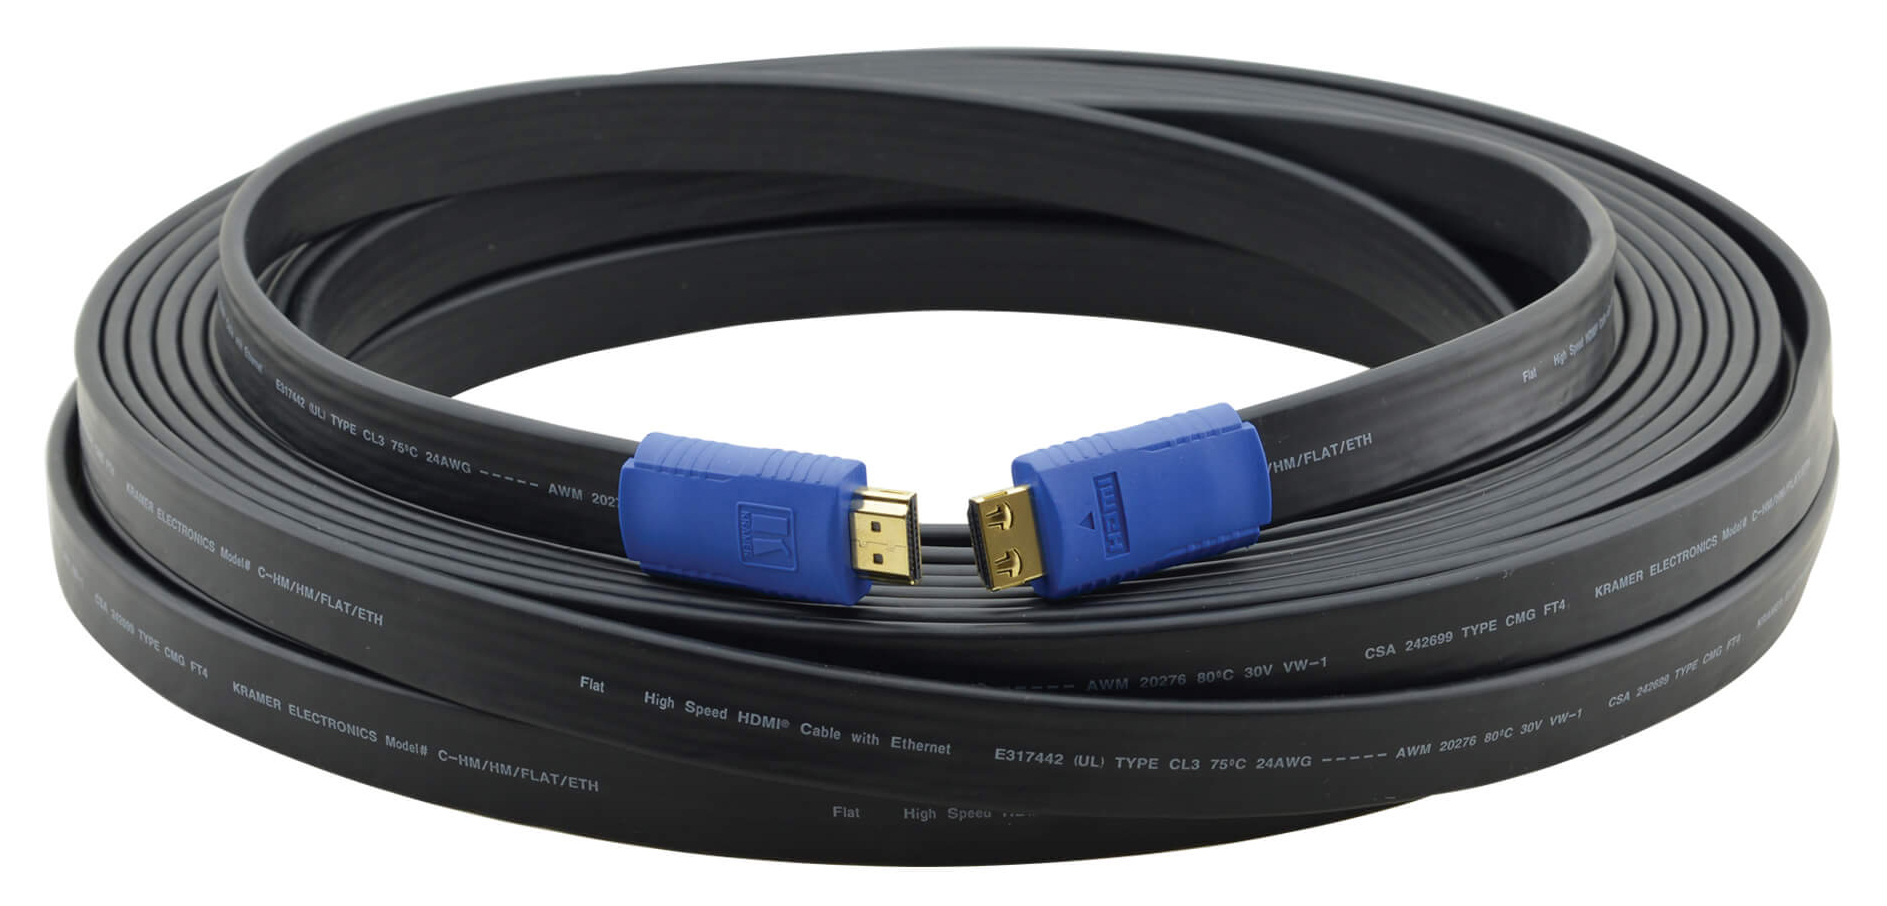 You Recently Viewed Kramer Flat High–Speed HDMI Cable Image